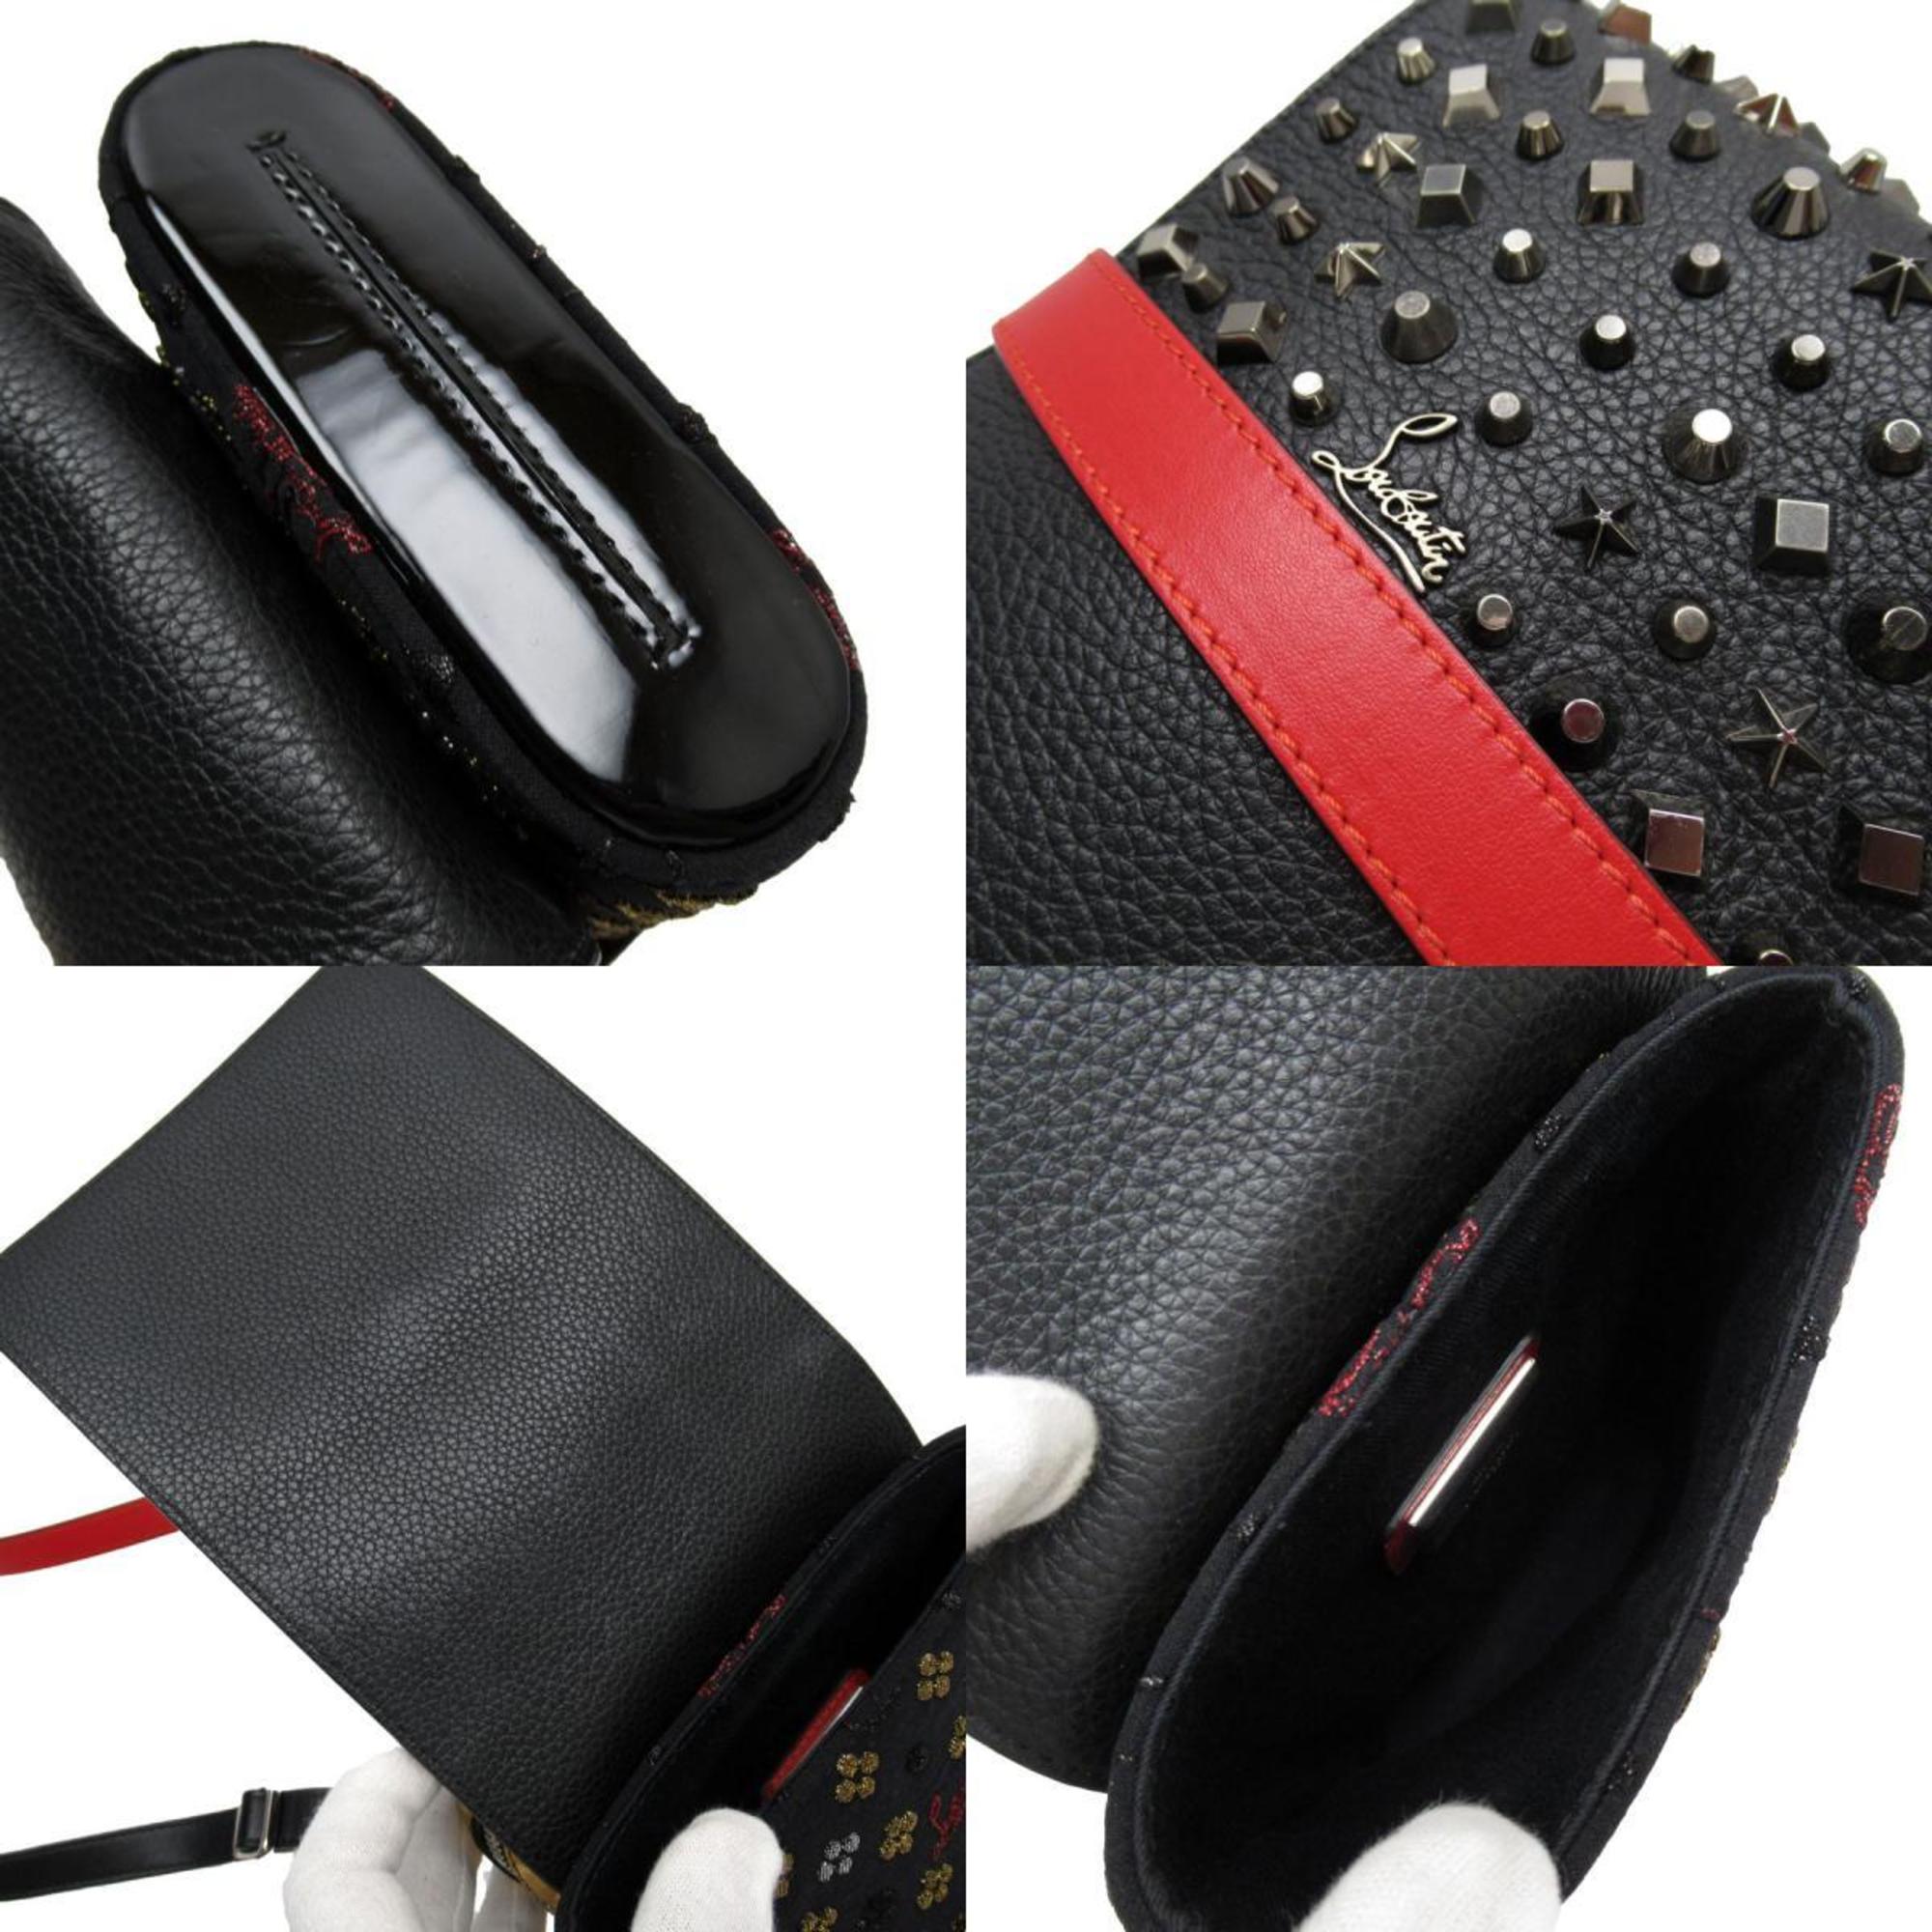 Christian Louboutin Shoulder Bag Leather/Studs Black/Gold/Red/Silver Unisex w0164g